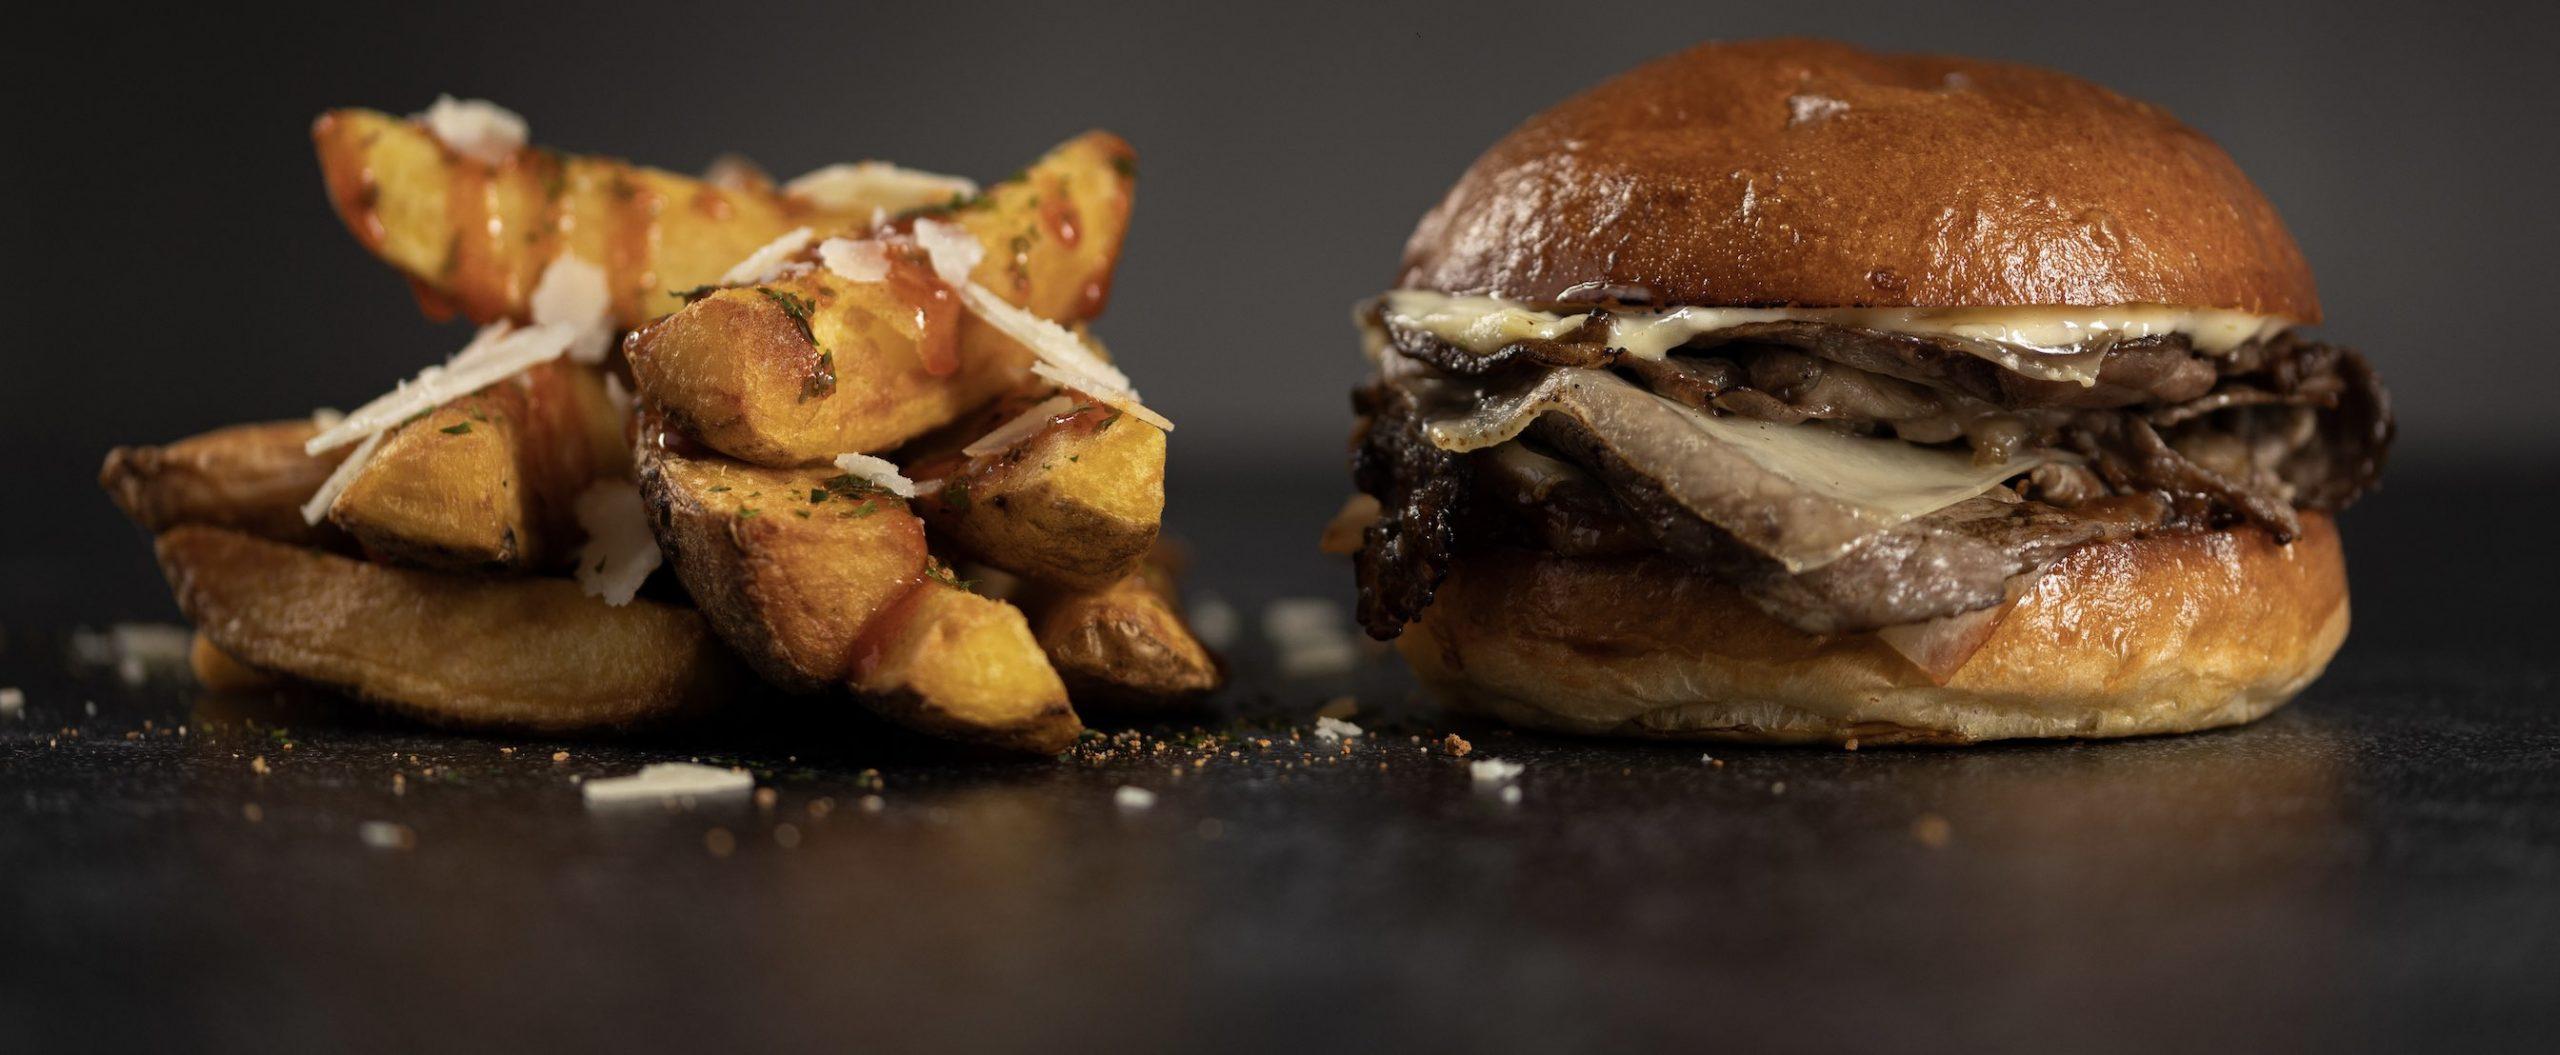 A new burger menu from acclaimed Chef Izu Ani is launching today